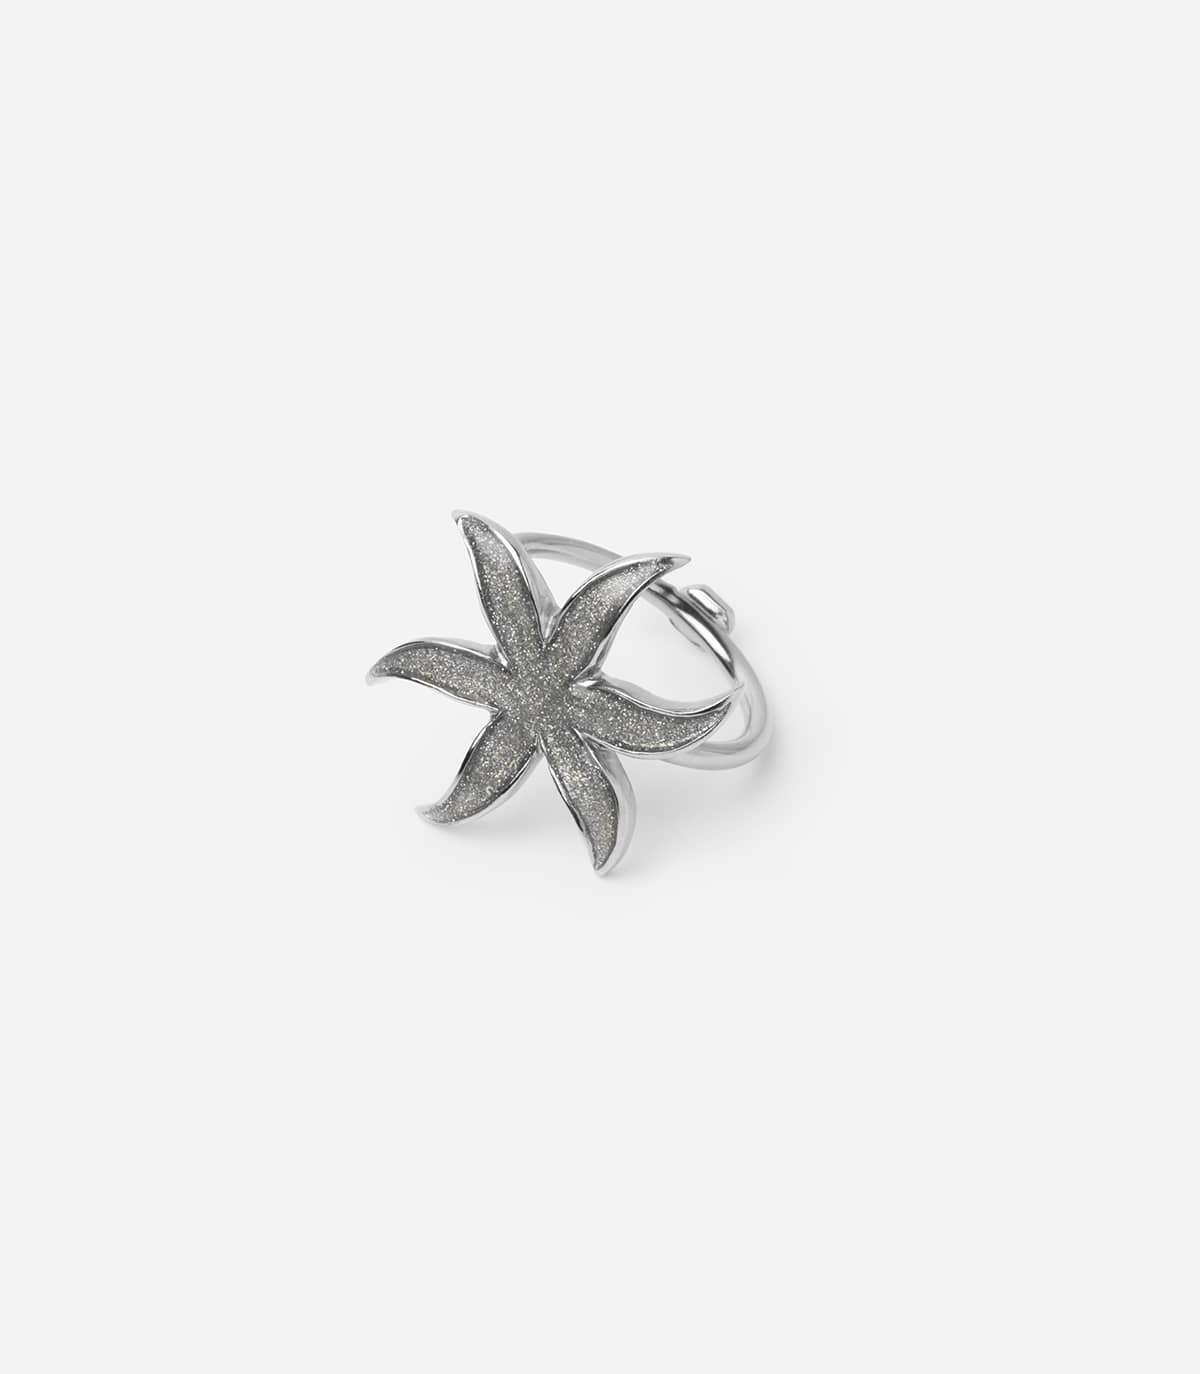 FENRIR SMALL EDELWEISS RING - Bagues - Delphine-Charlotte Parmentier